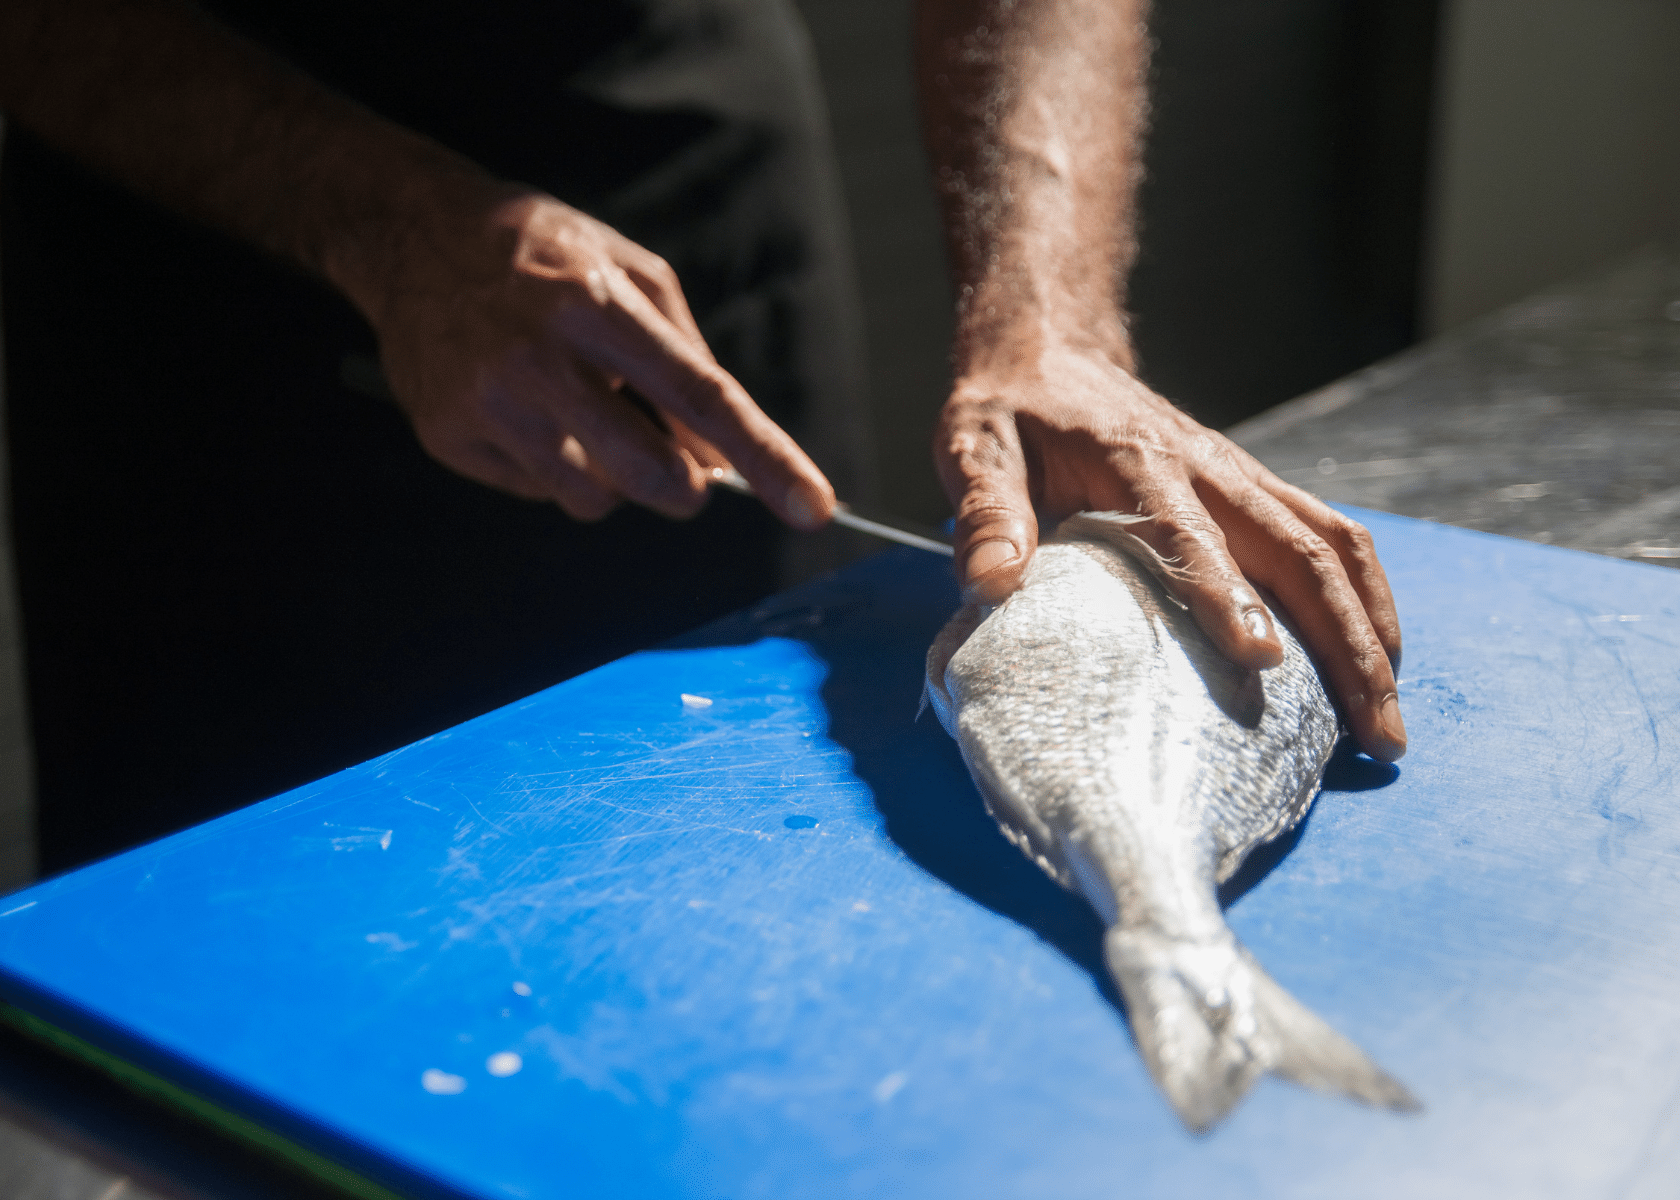 A man filleting a fish on a blue table with a fillet knife.